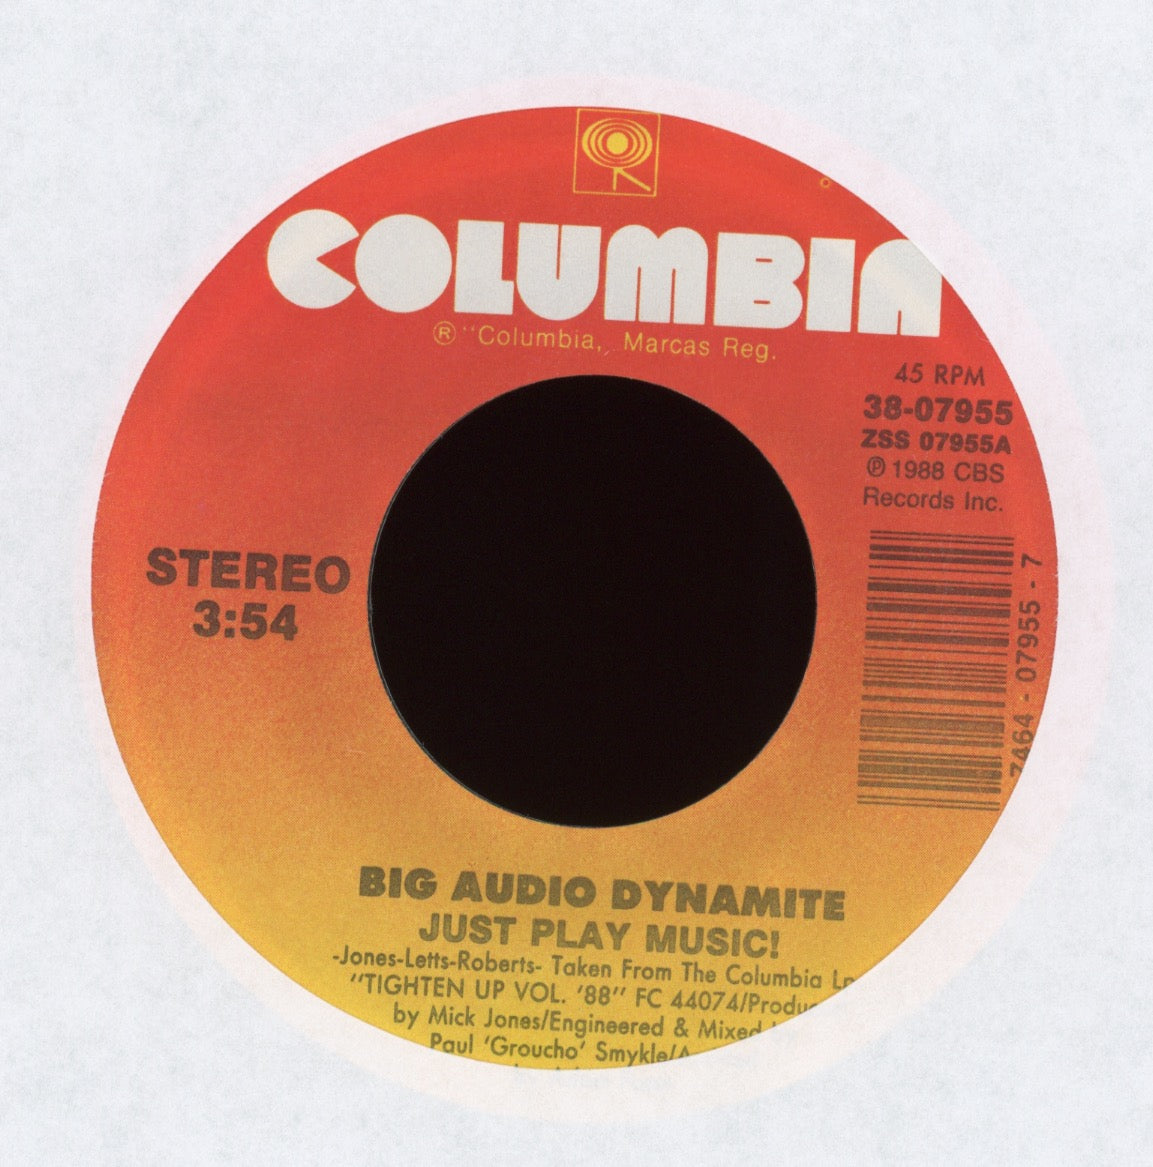 Big Audio Dynamite - Just Play Music! on Columbia With Picture Sleeve